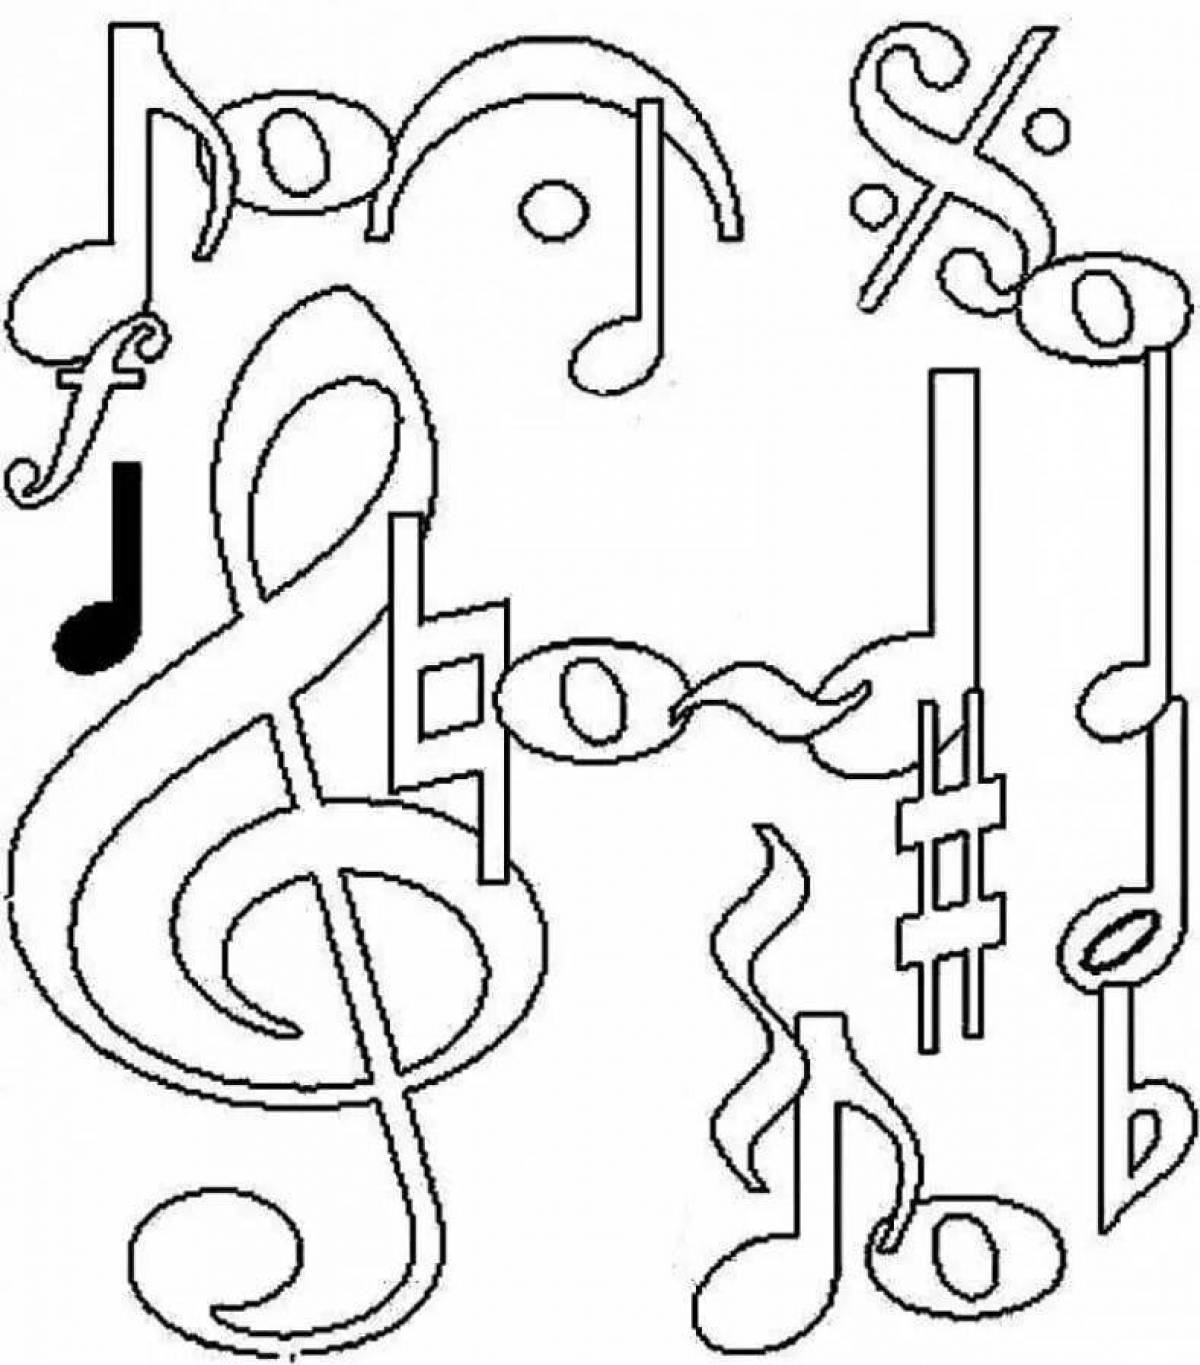 Music notes and treble clef #1